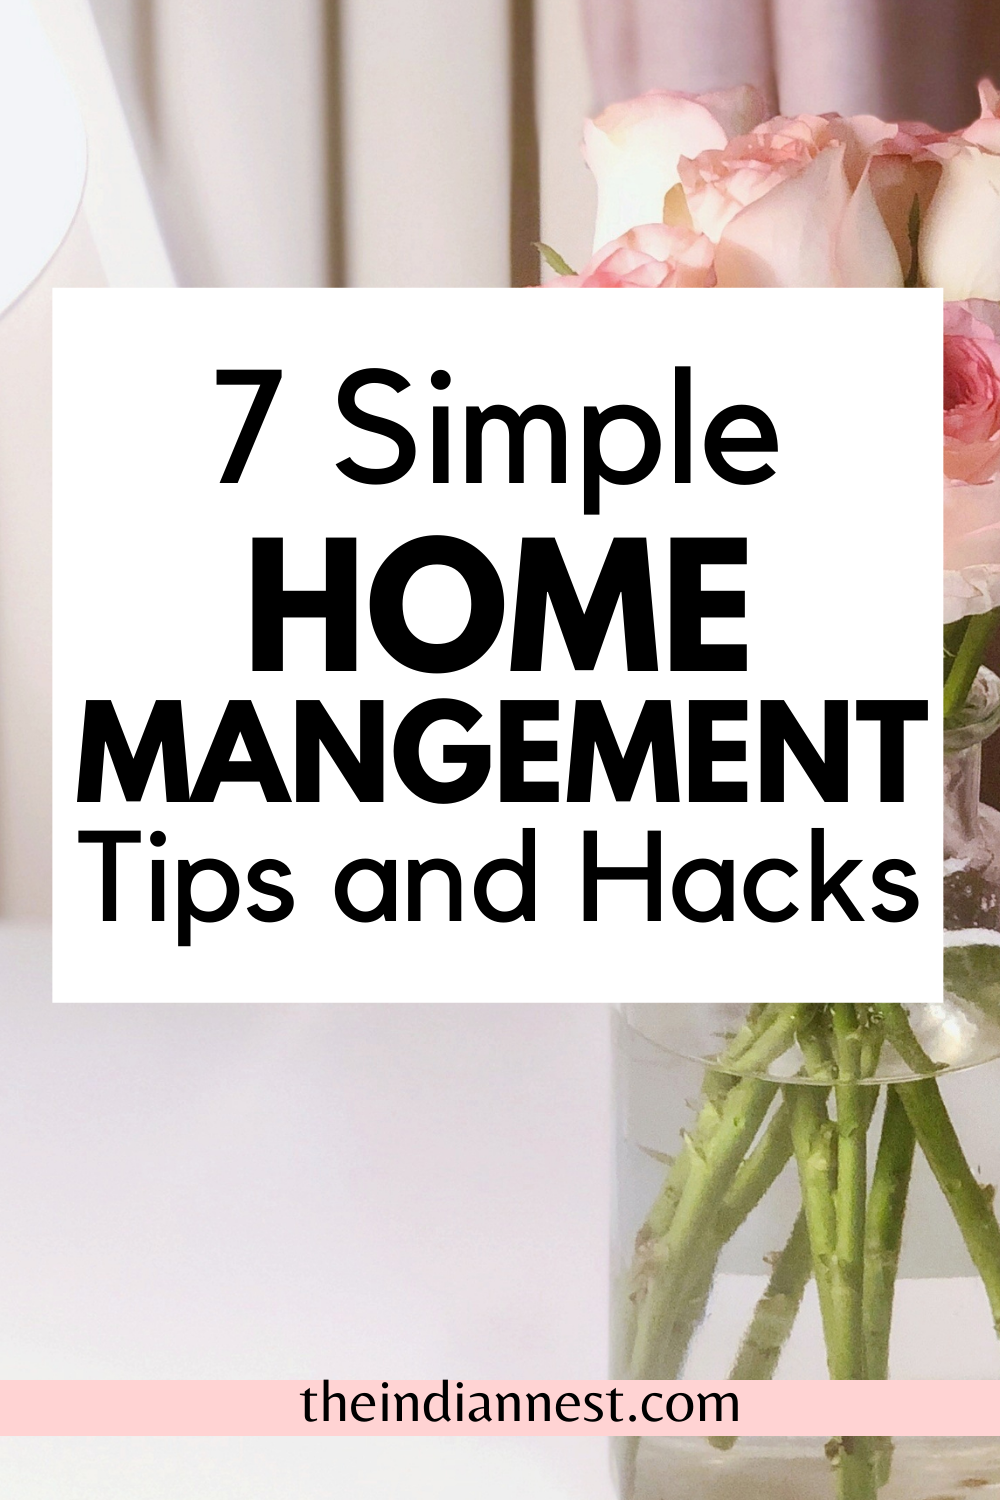 Top Home Management Tips That Are Actually Easy and Effective. Basic Home Management System for Stressless life